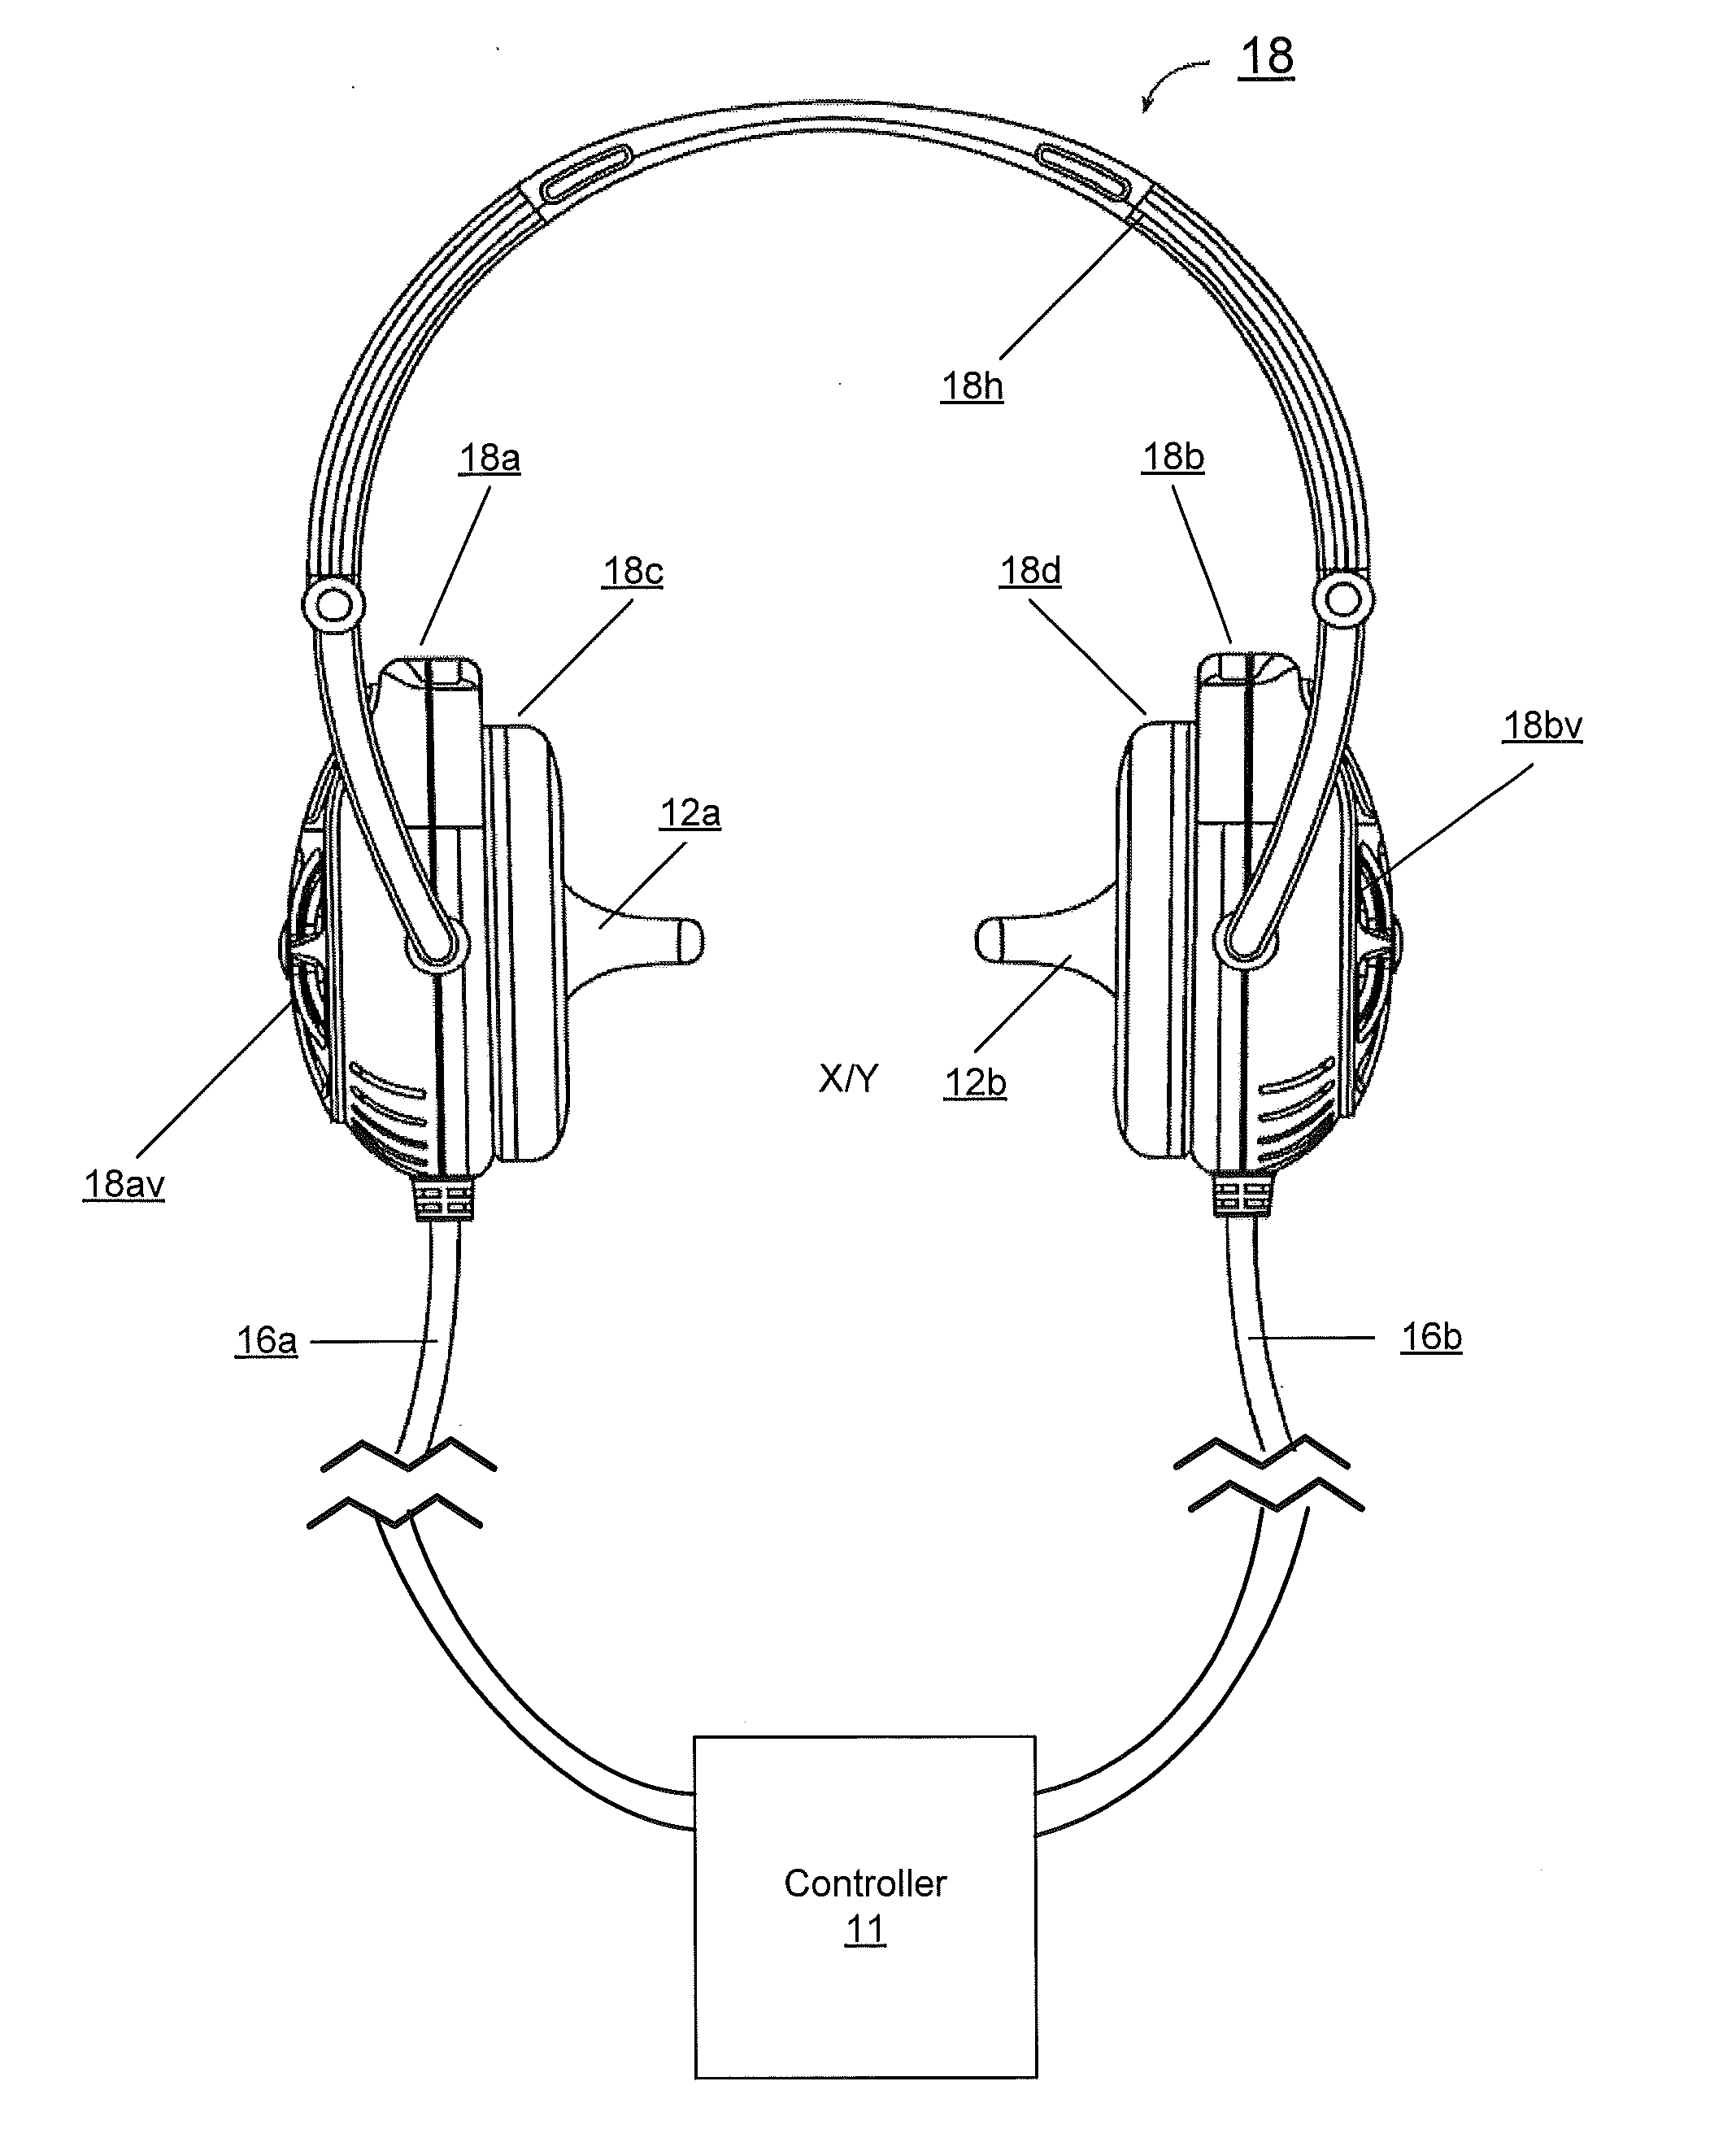 Systems, Methods and Apparatus for Delivering Nerve Stimulation to a Patient with Physician Oversight